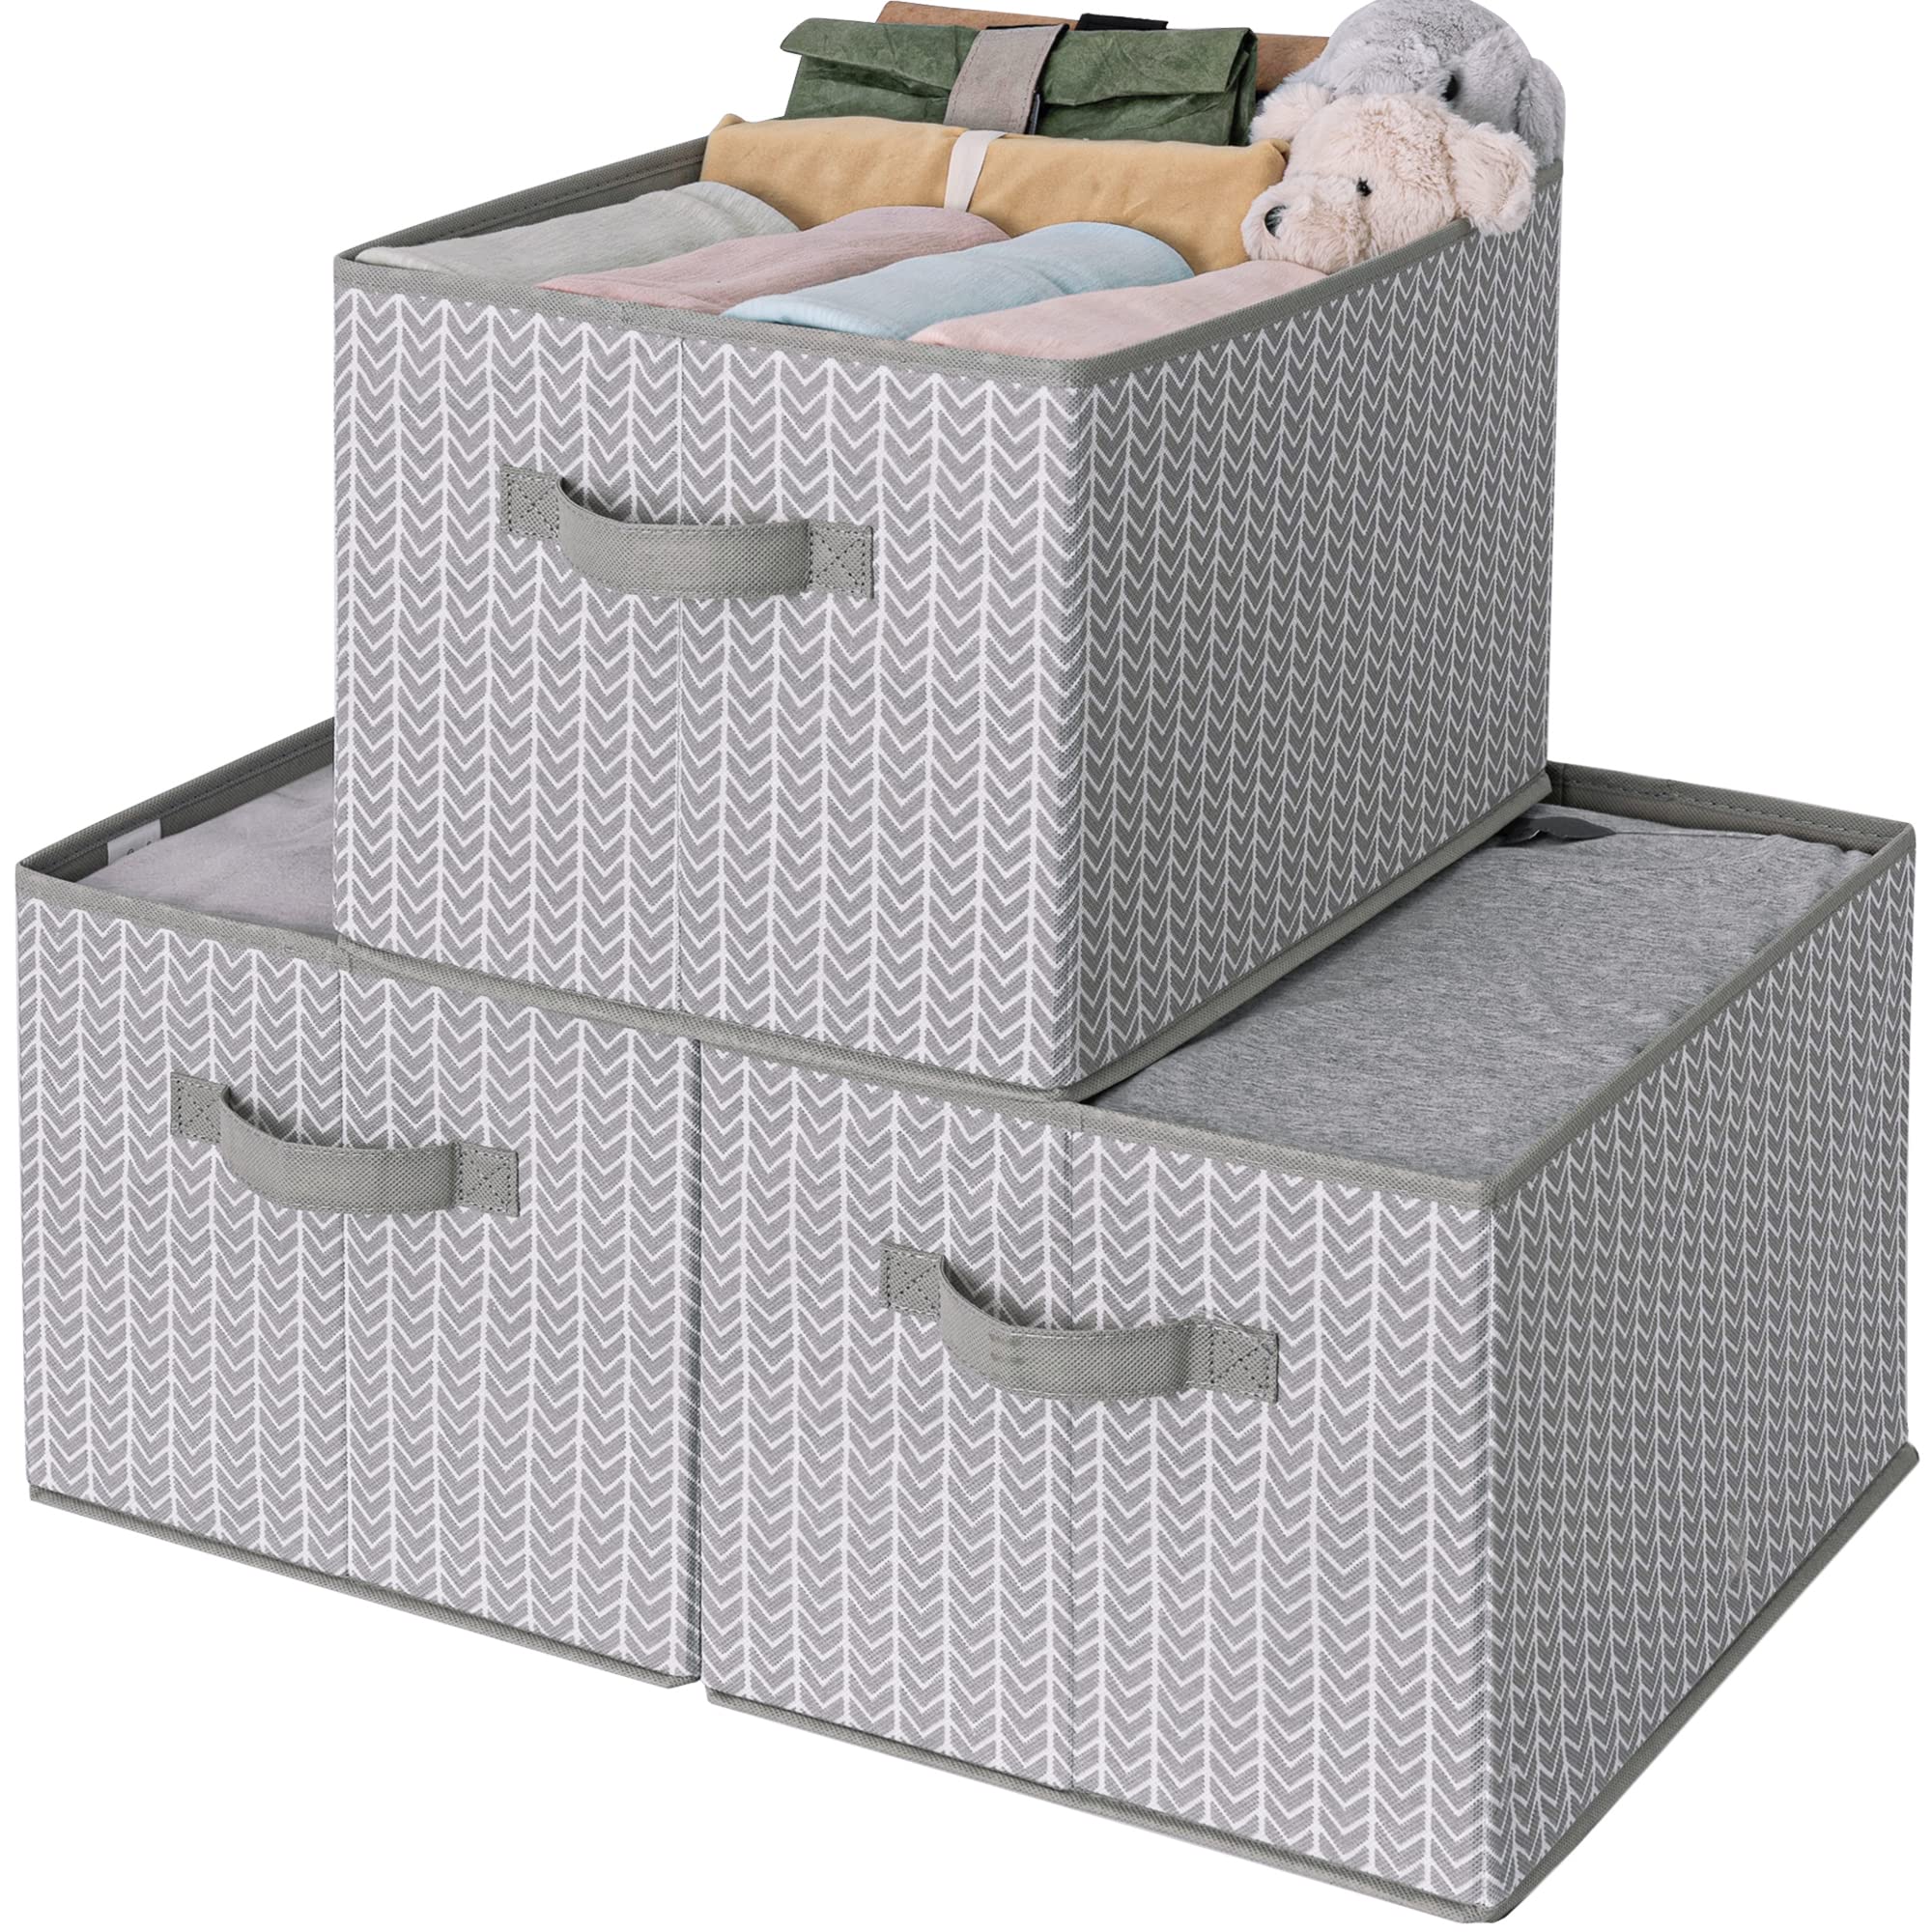 GRANNY SAYS Bundle of 3-Pack Closet Storage Boxes & 2-Pack Wicker Storage Baskets for Shelves